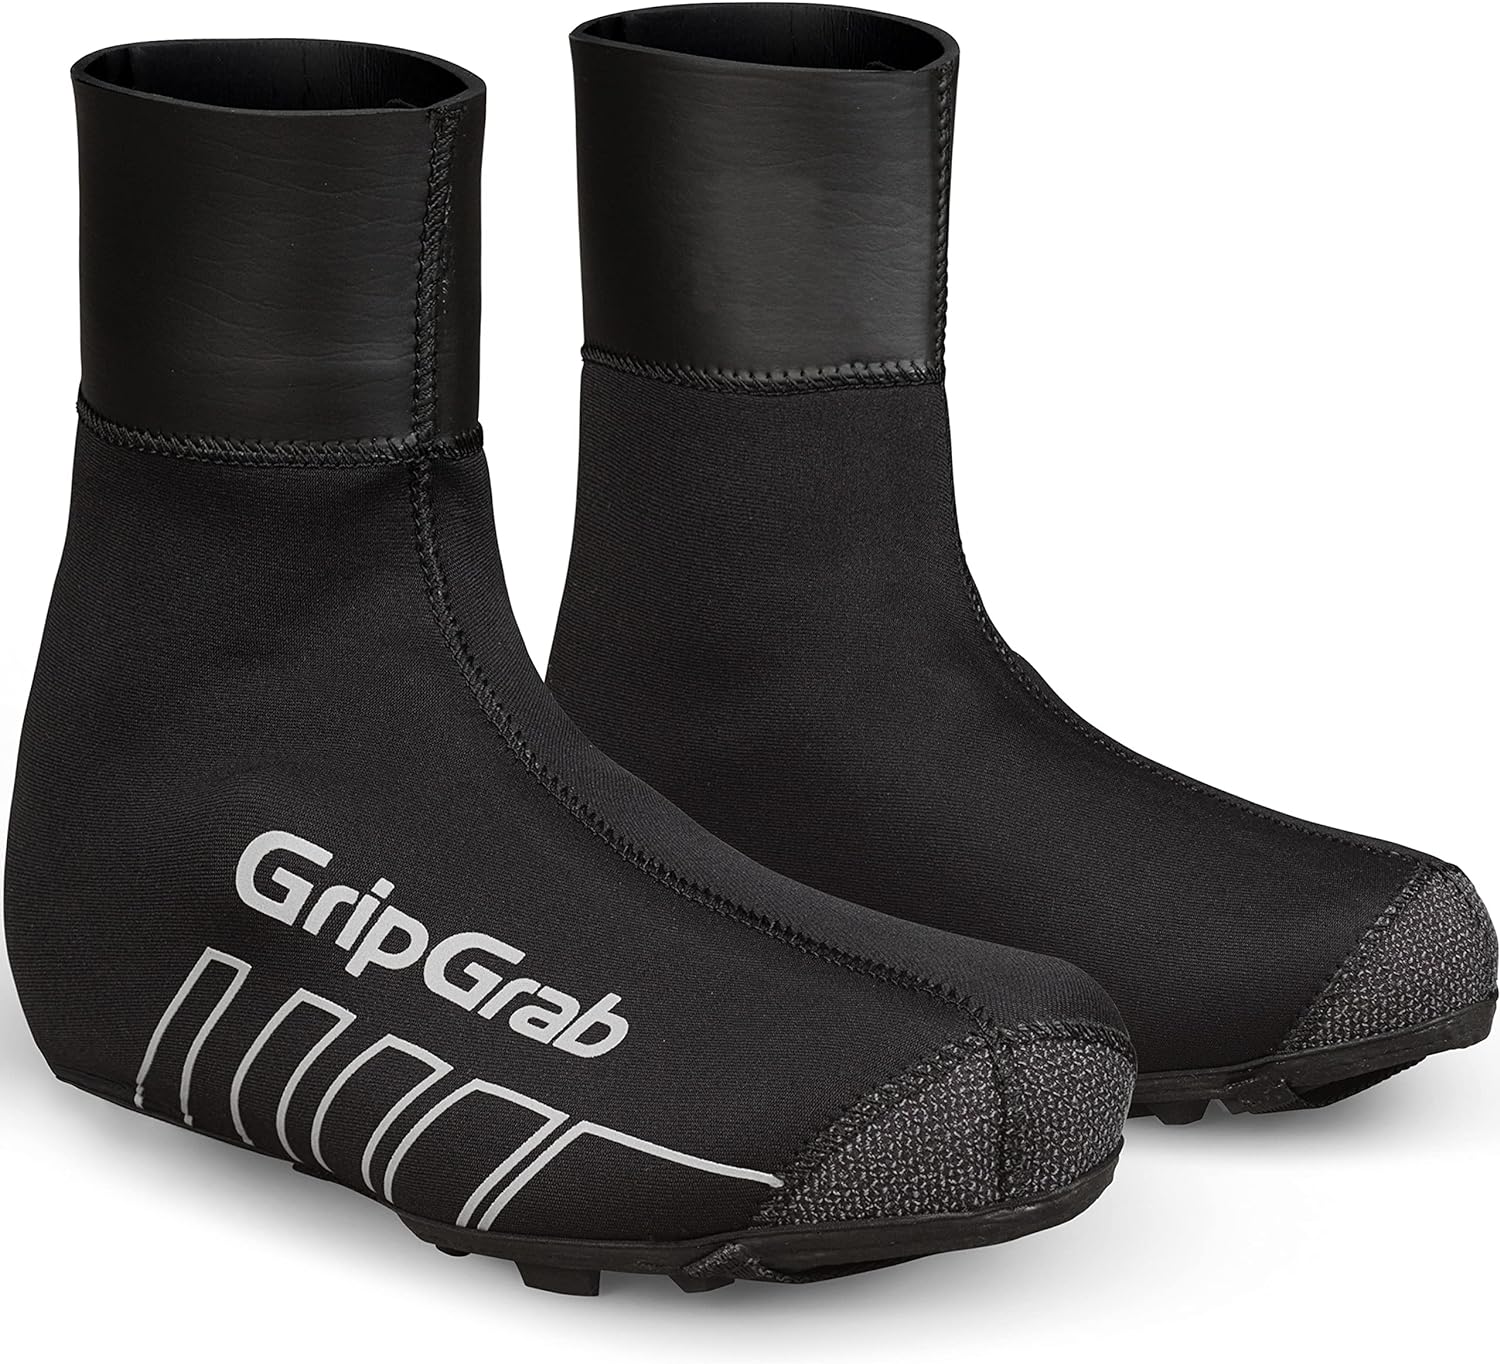 GripGrab RaceThermo X Waterproof Overshoes Review